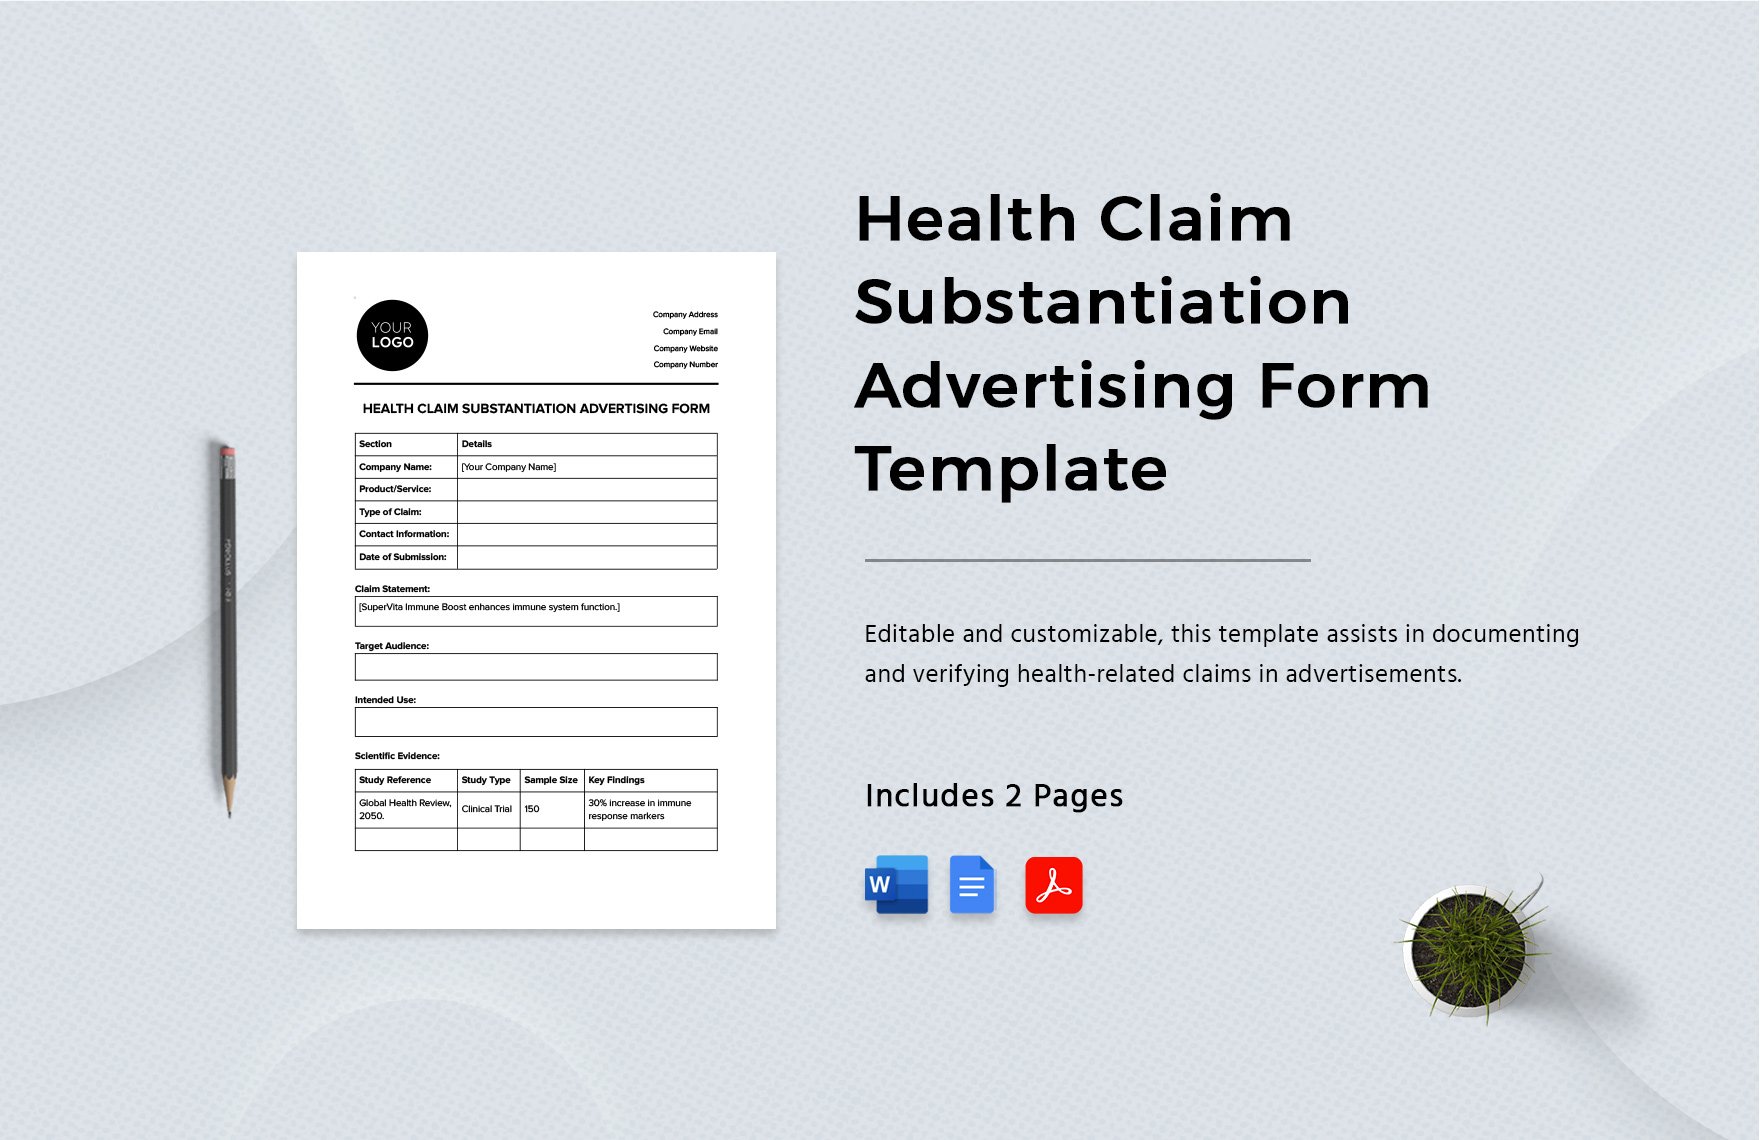 Health Claim Substantiation Advertising Form Template in Word, Google Docs, PDF